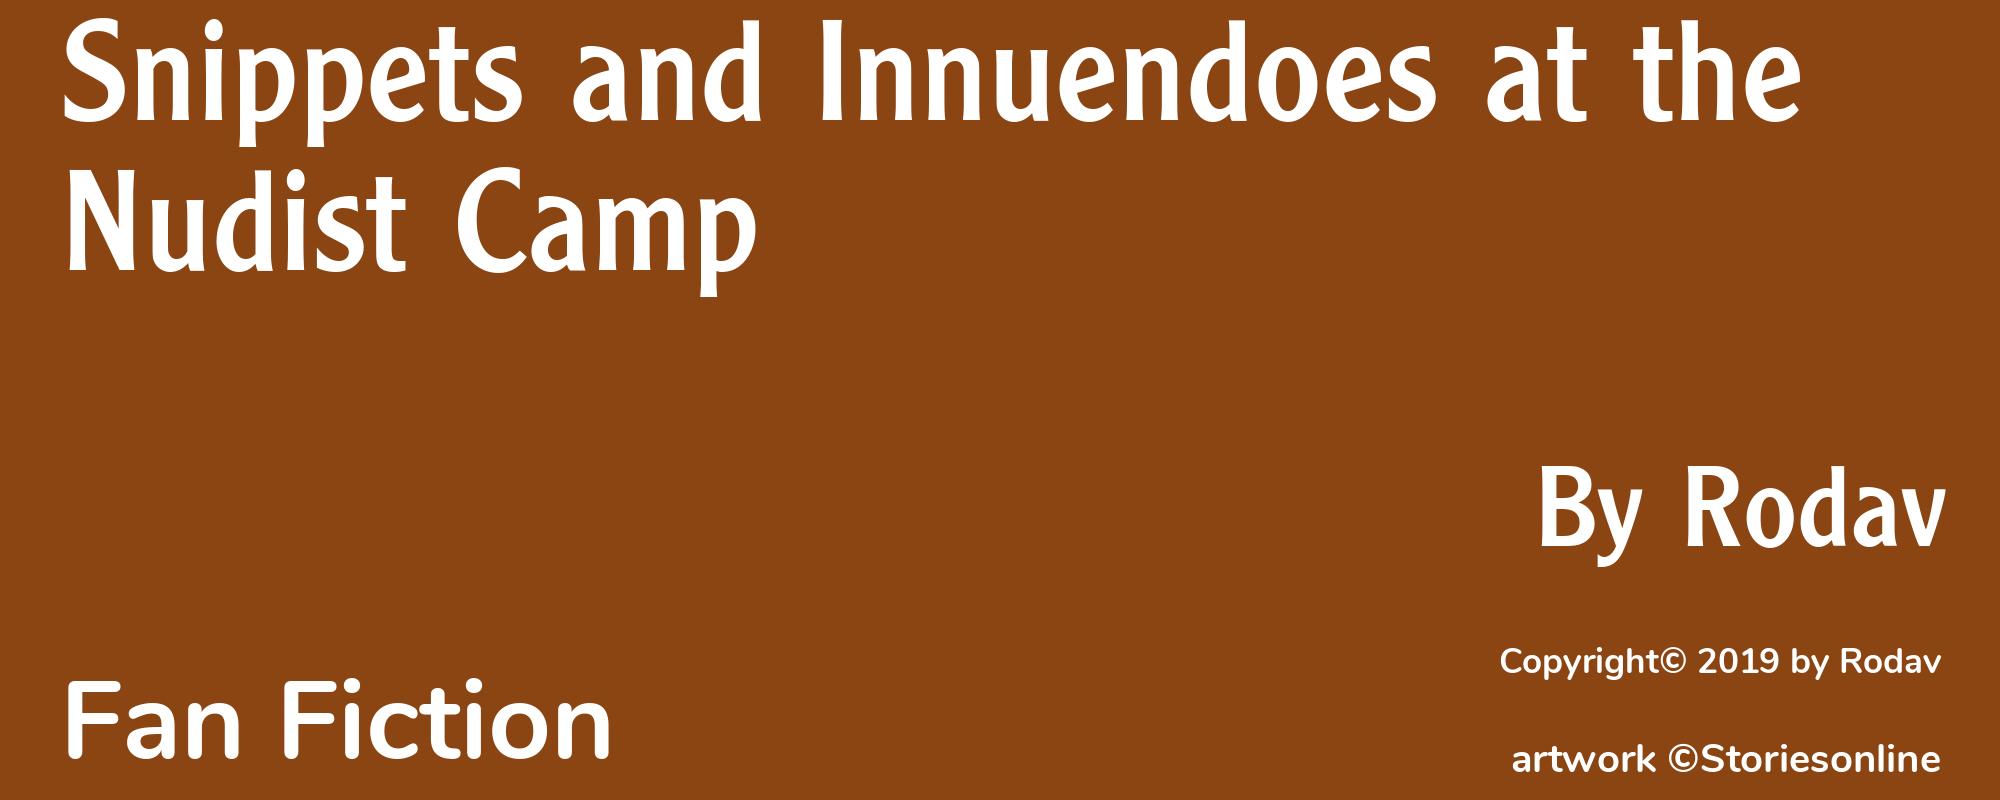 Snippets and Innuendoes at the Nudist Camp - Cover